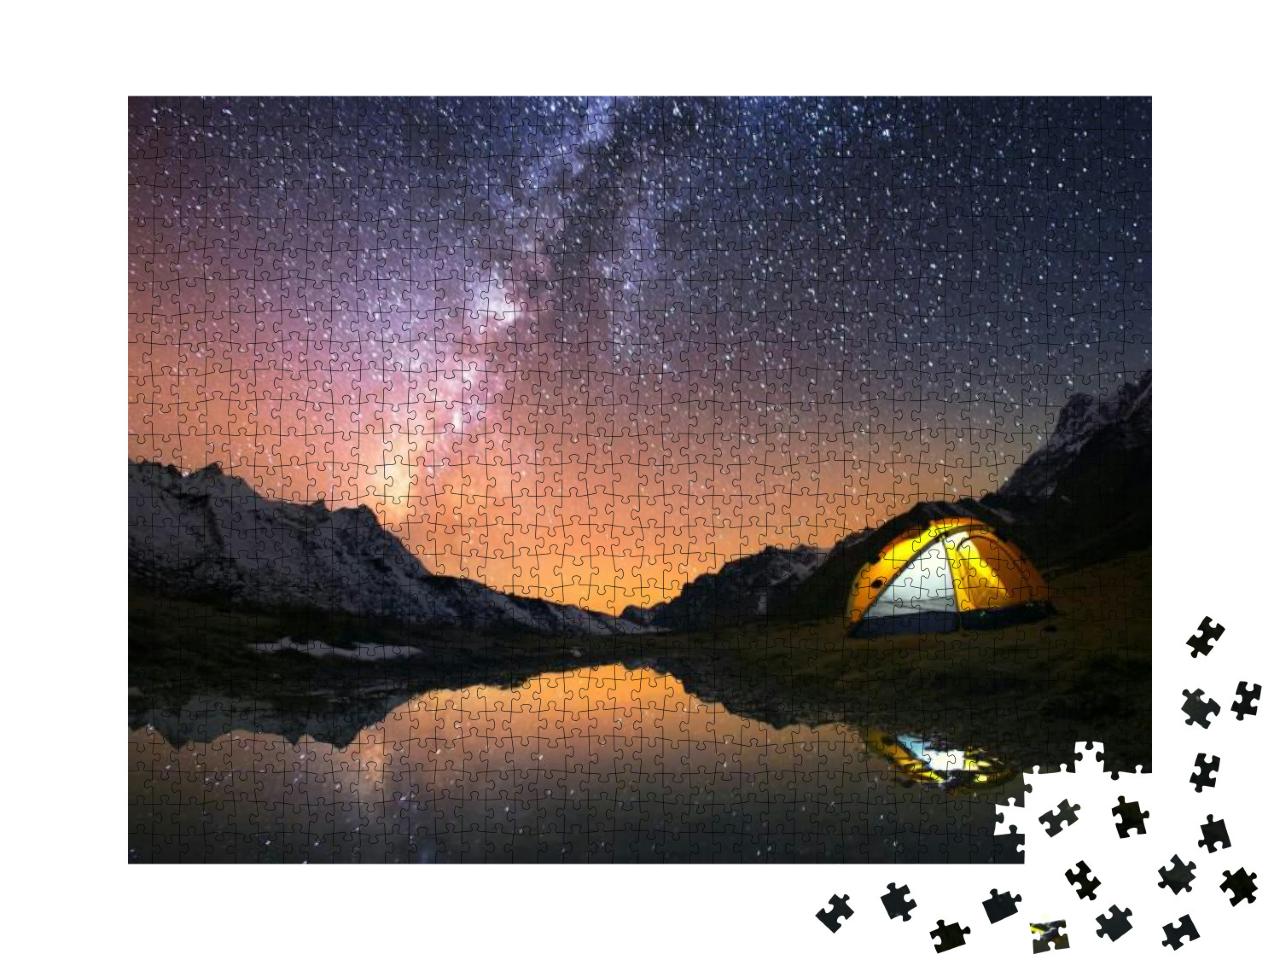 5 Billion Star Hotel. Camping in the Mountains Under the... Jigsaw Puzzle with 1000 pieces